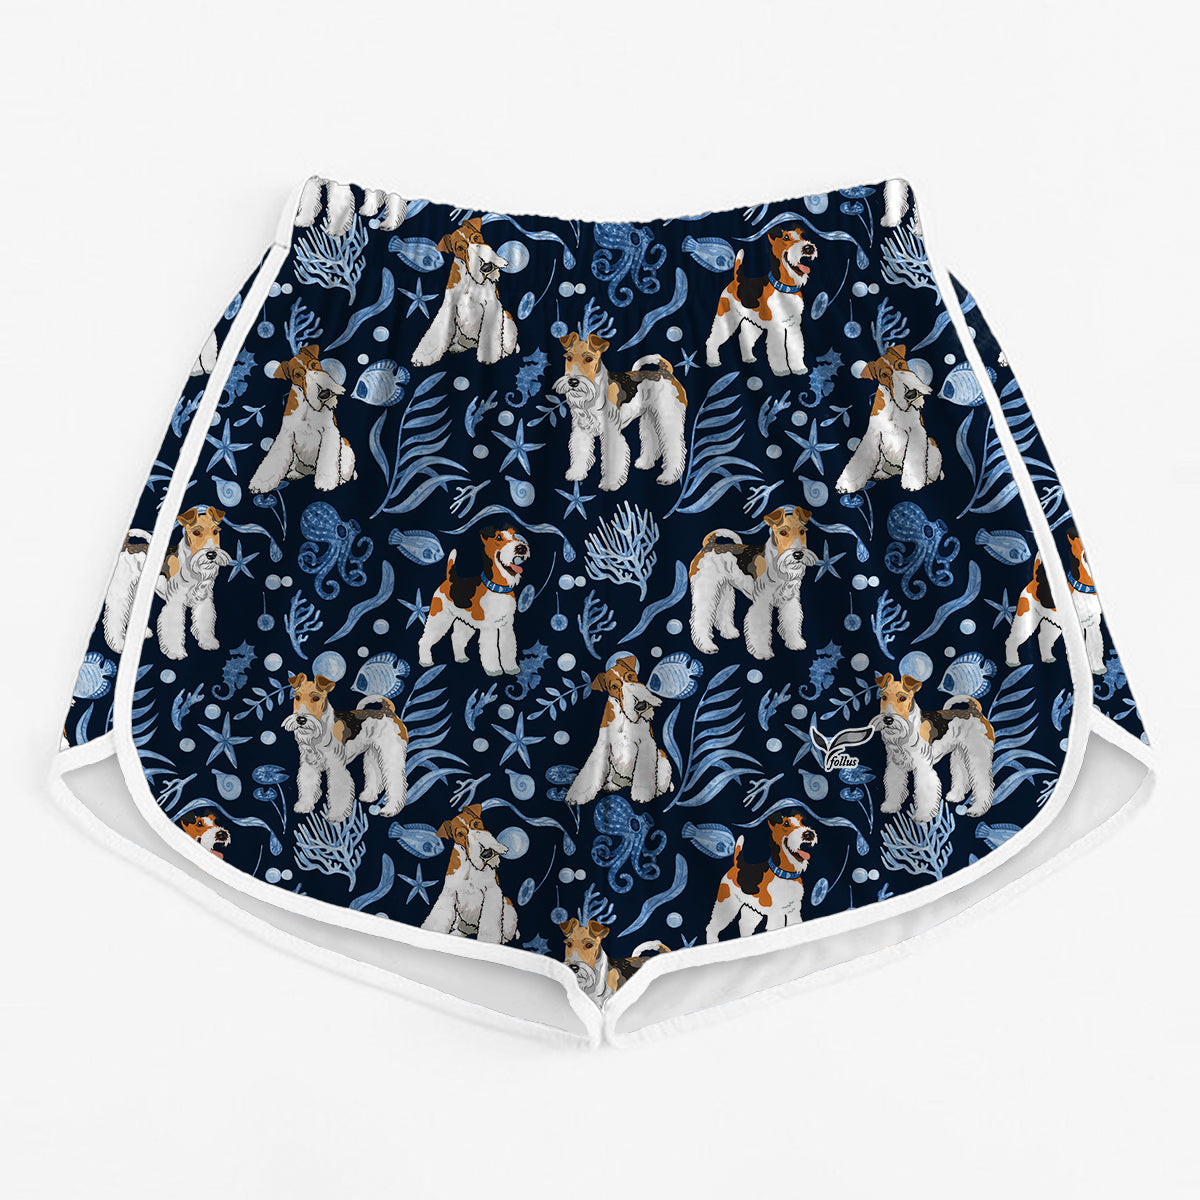 Wire Fox Terrier - Colorful Women's Running Shorts V4